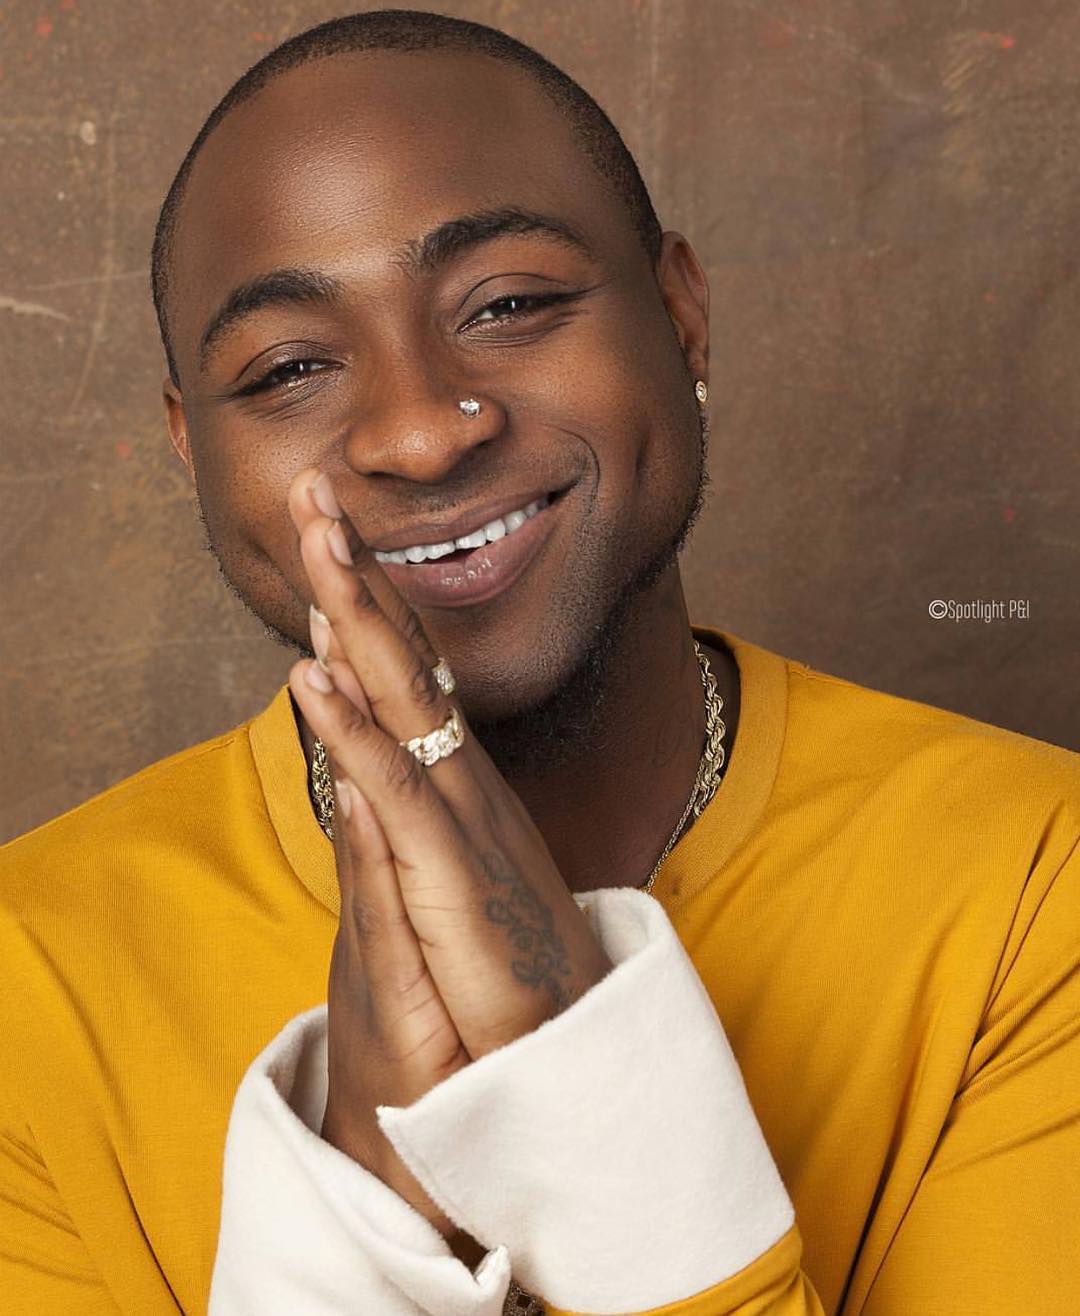 Davido Apologizes To The Lady He Body-shamed